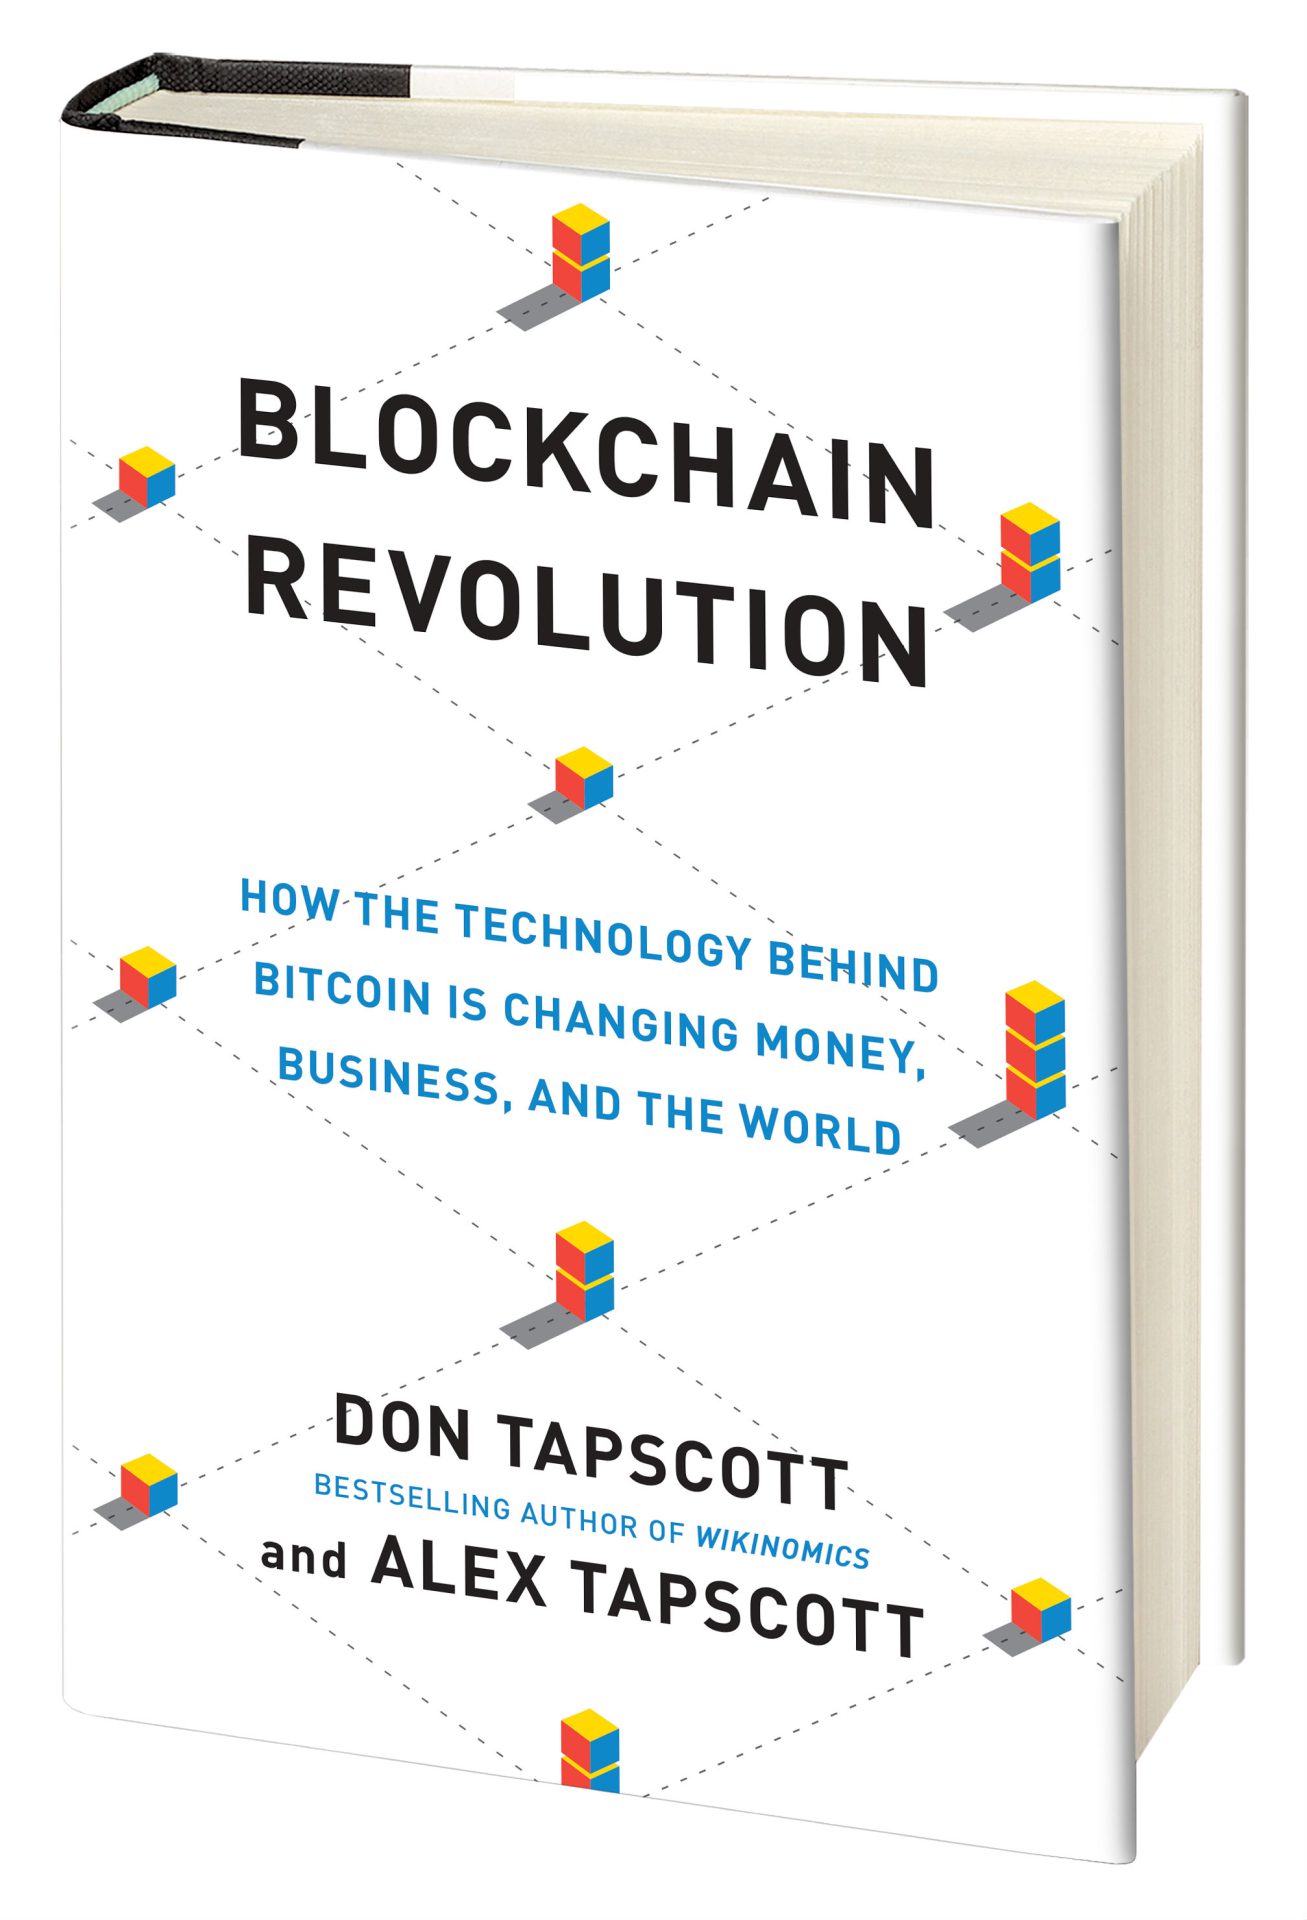 Fintech Innovation and Disruption. Blockchain Insights with Don and Alex Tapscott